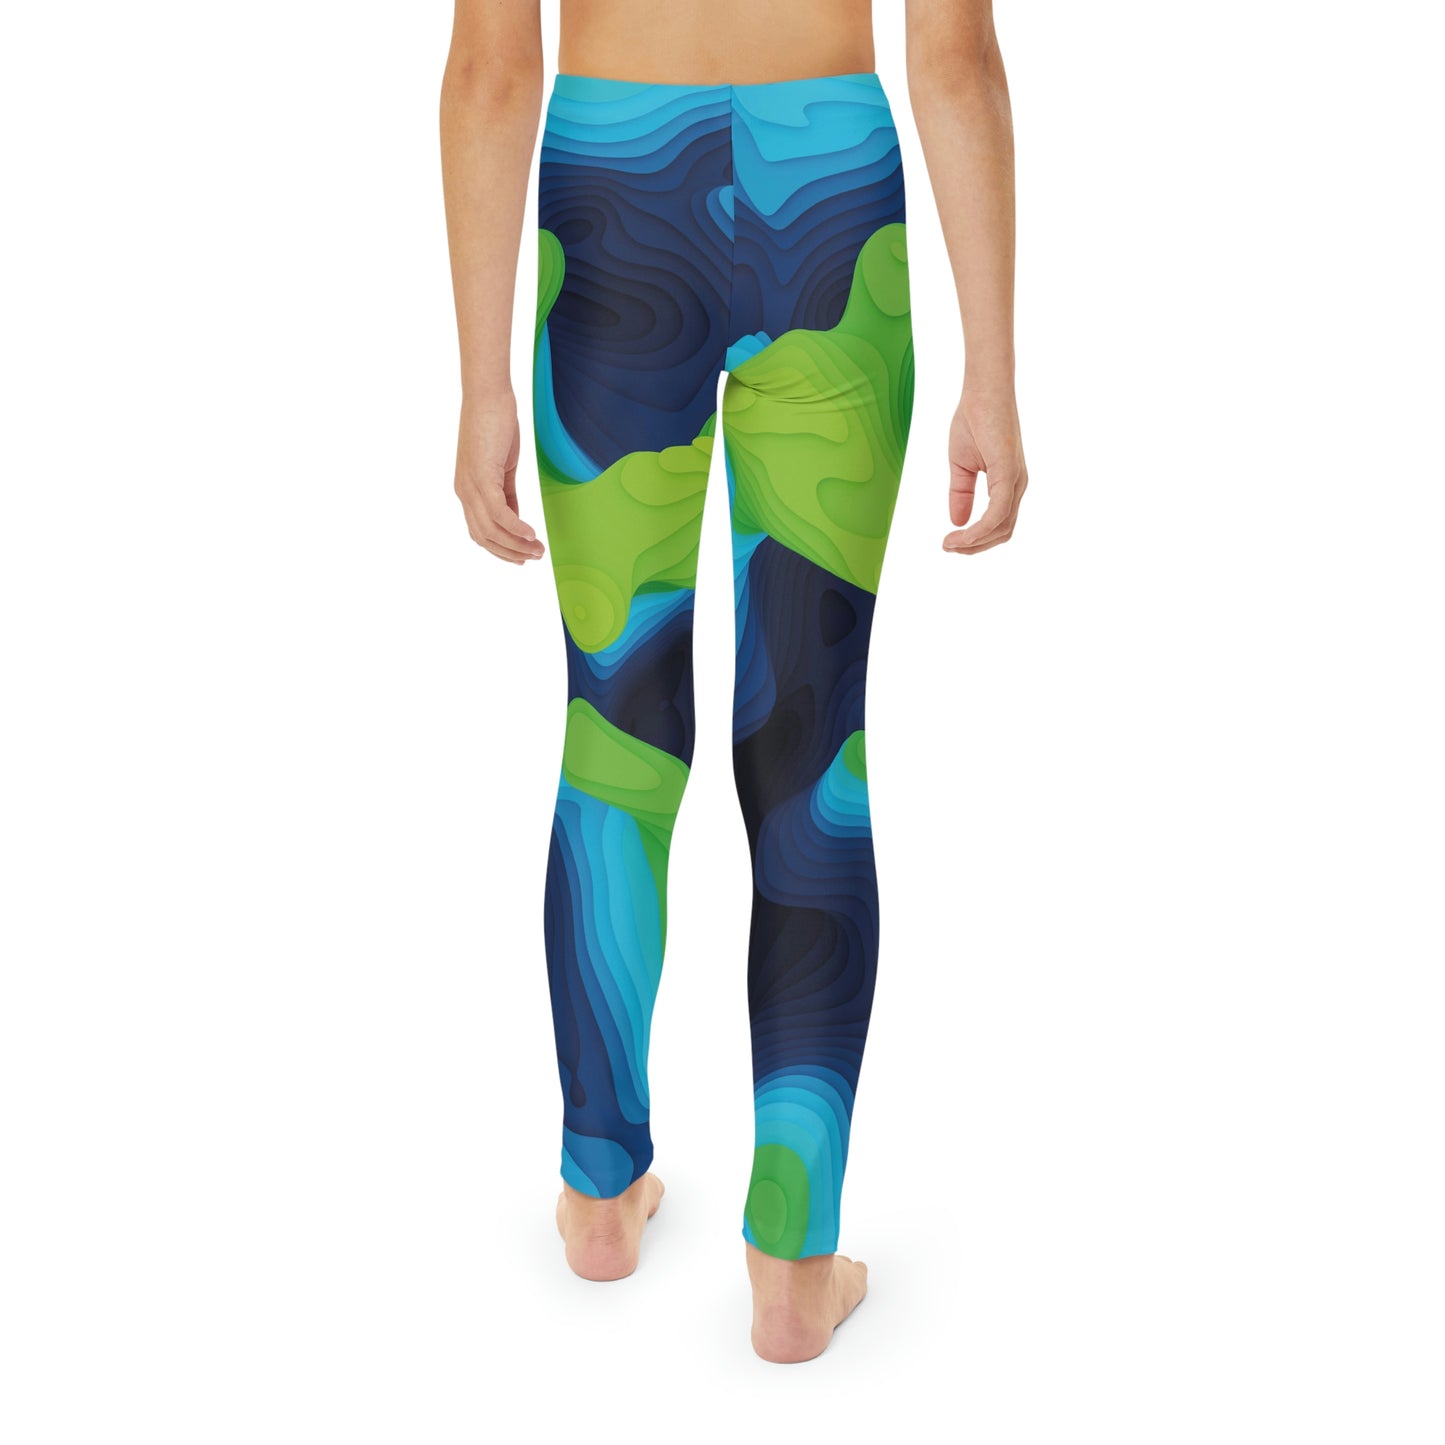 Youth Leggings,  One of a Kind Gift - Unique Workout Activewear tights for a kid Fitness Enthusiast , Daughter, Niece  Christmas Gift